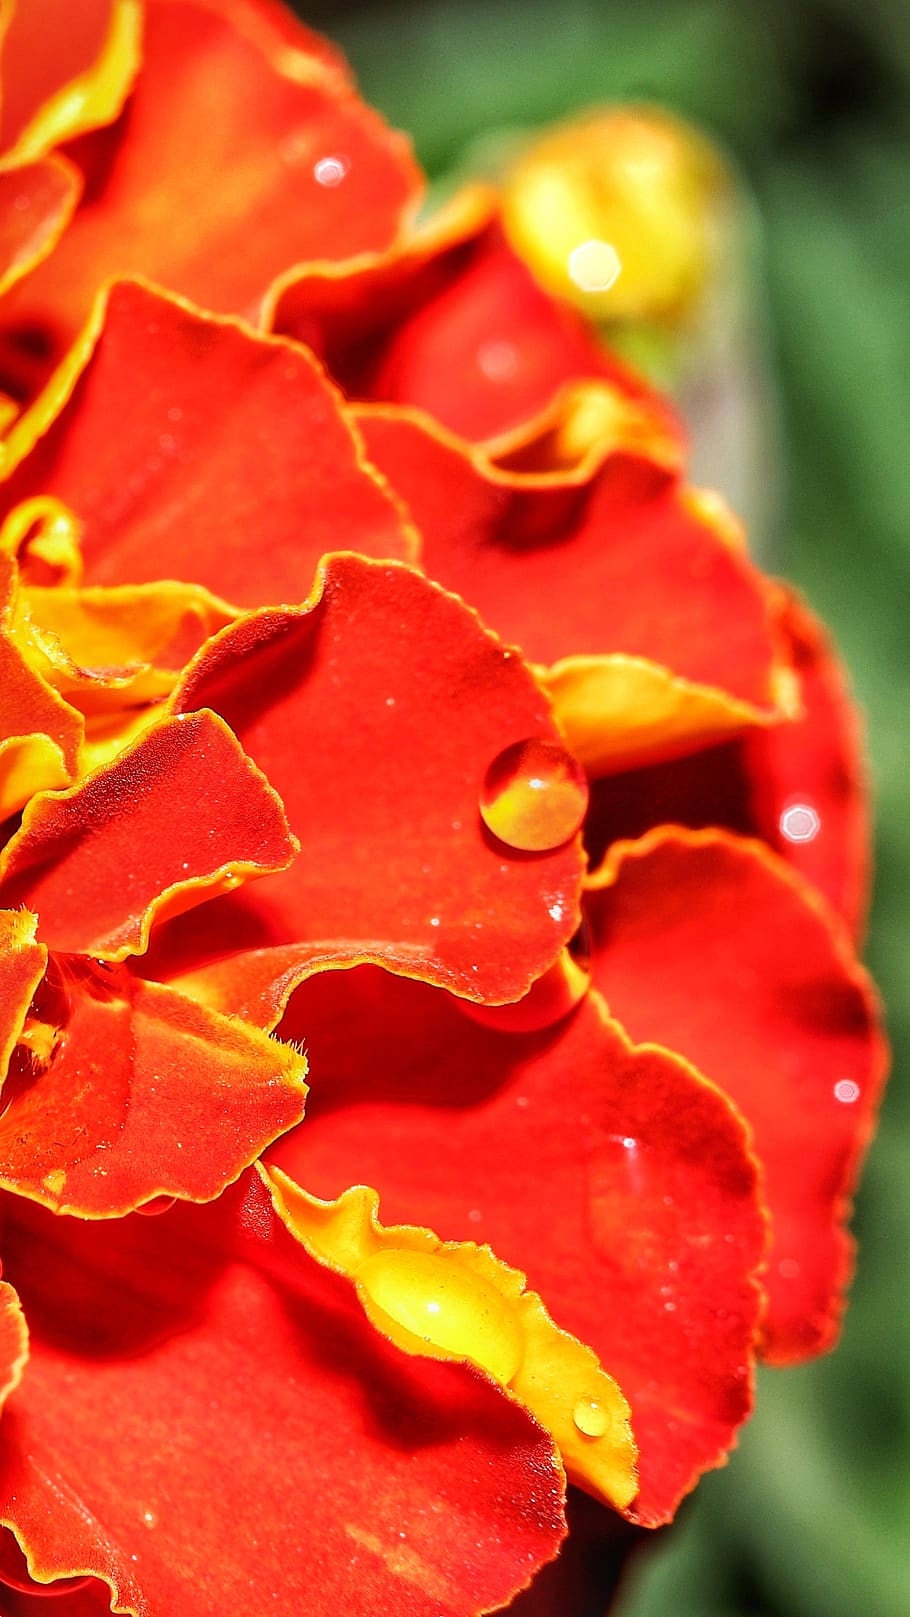 marigold, flower, red, water, drop, droplet, close-up, plant, freshness, petal